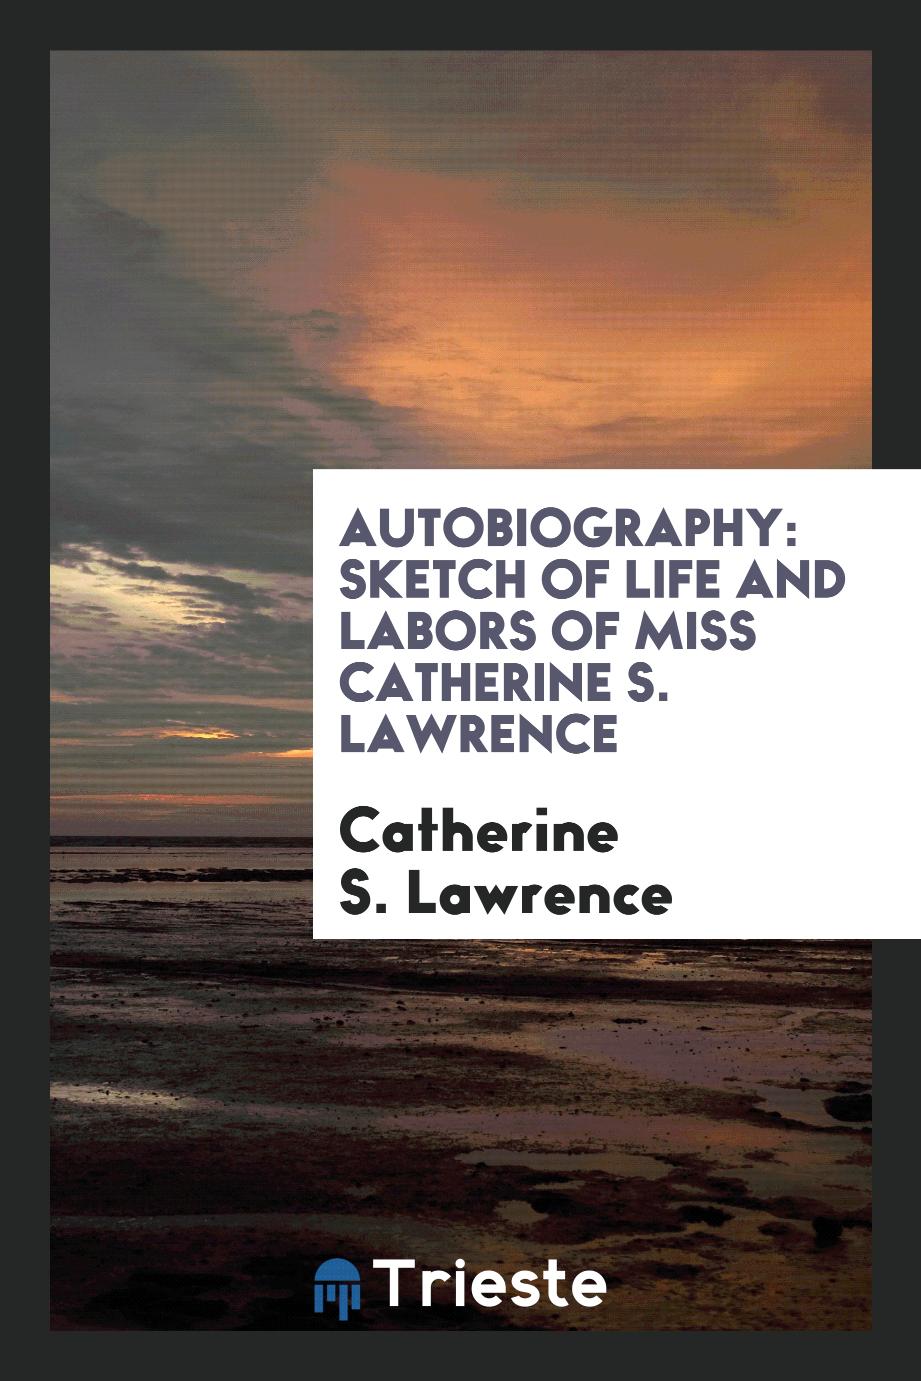 Autobiography: Sketch of Life and Labors of Miss Catherine S. Lawrence